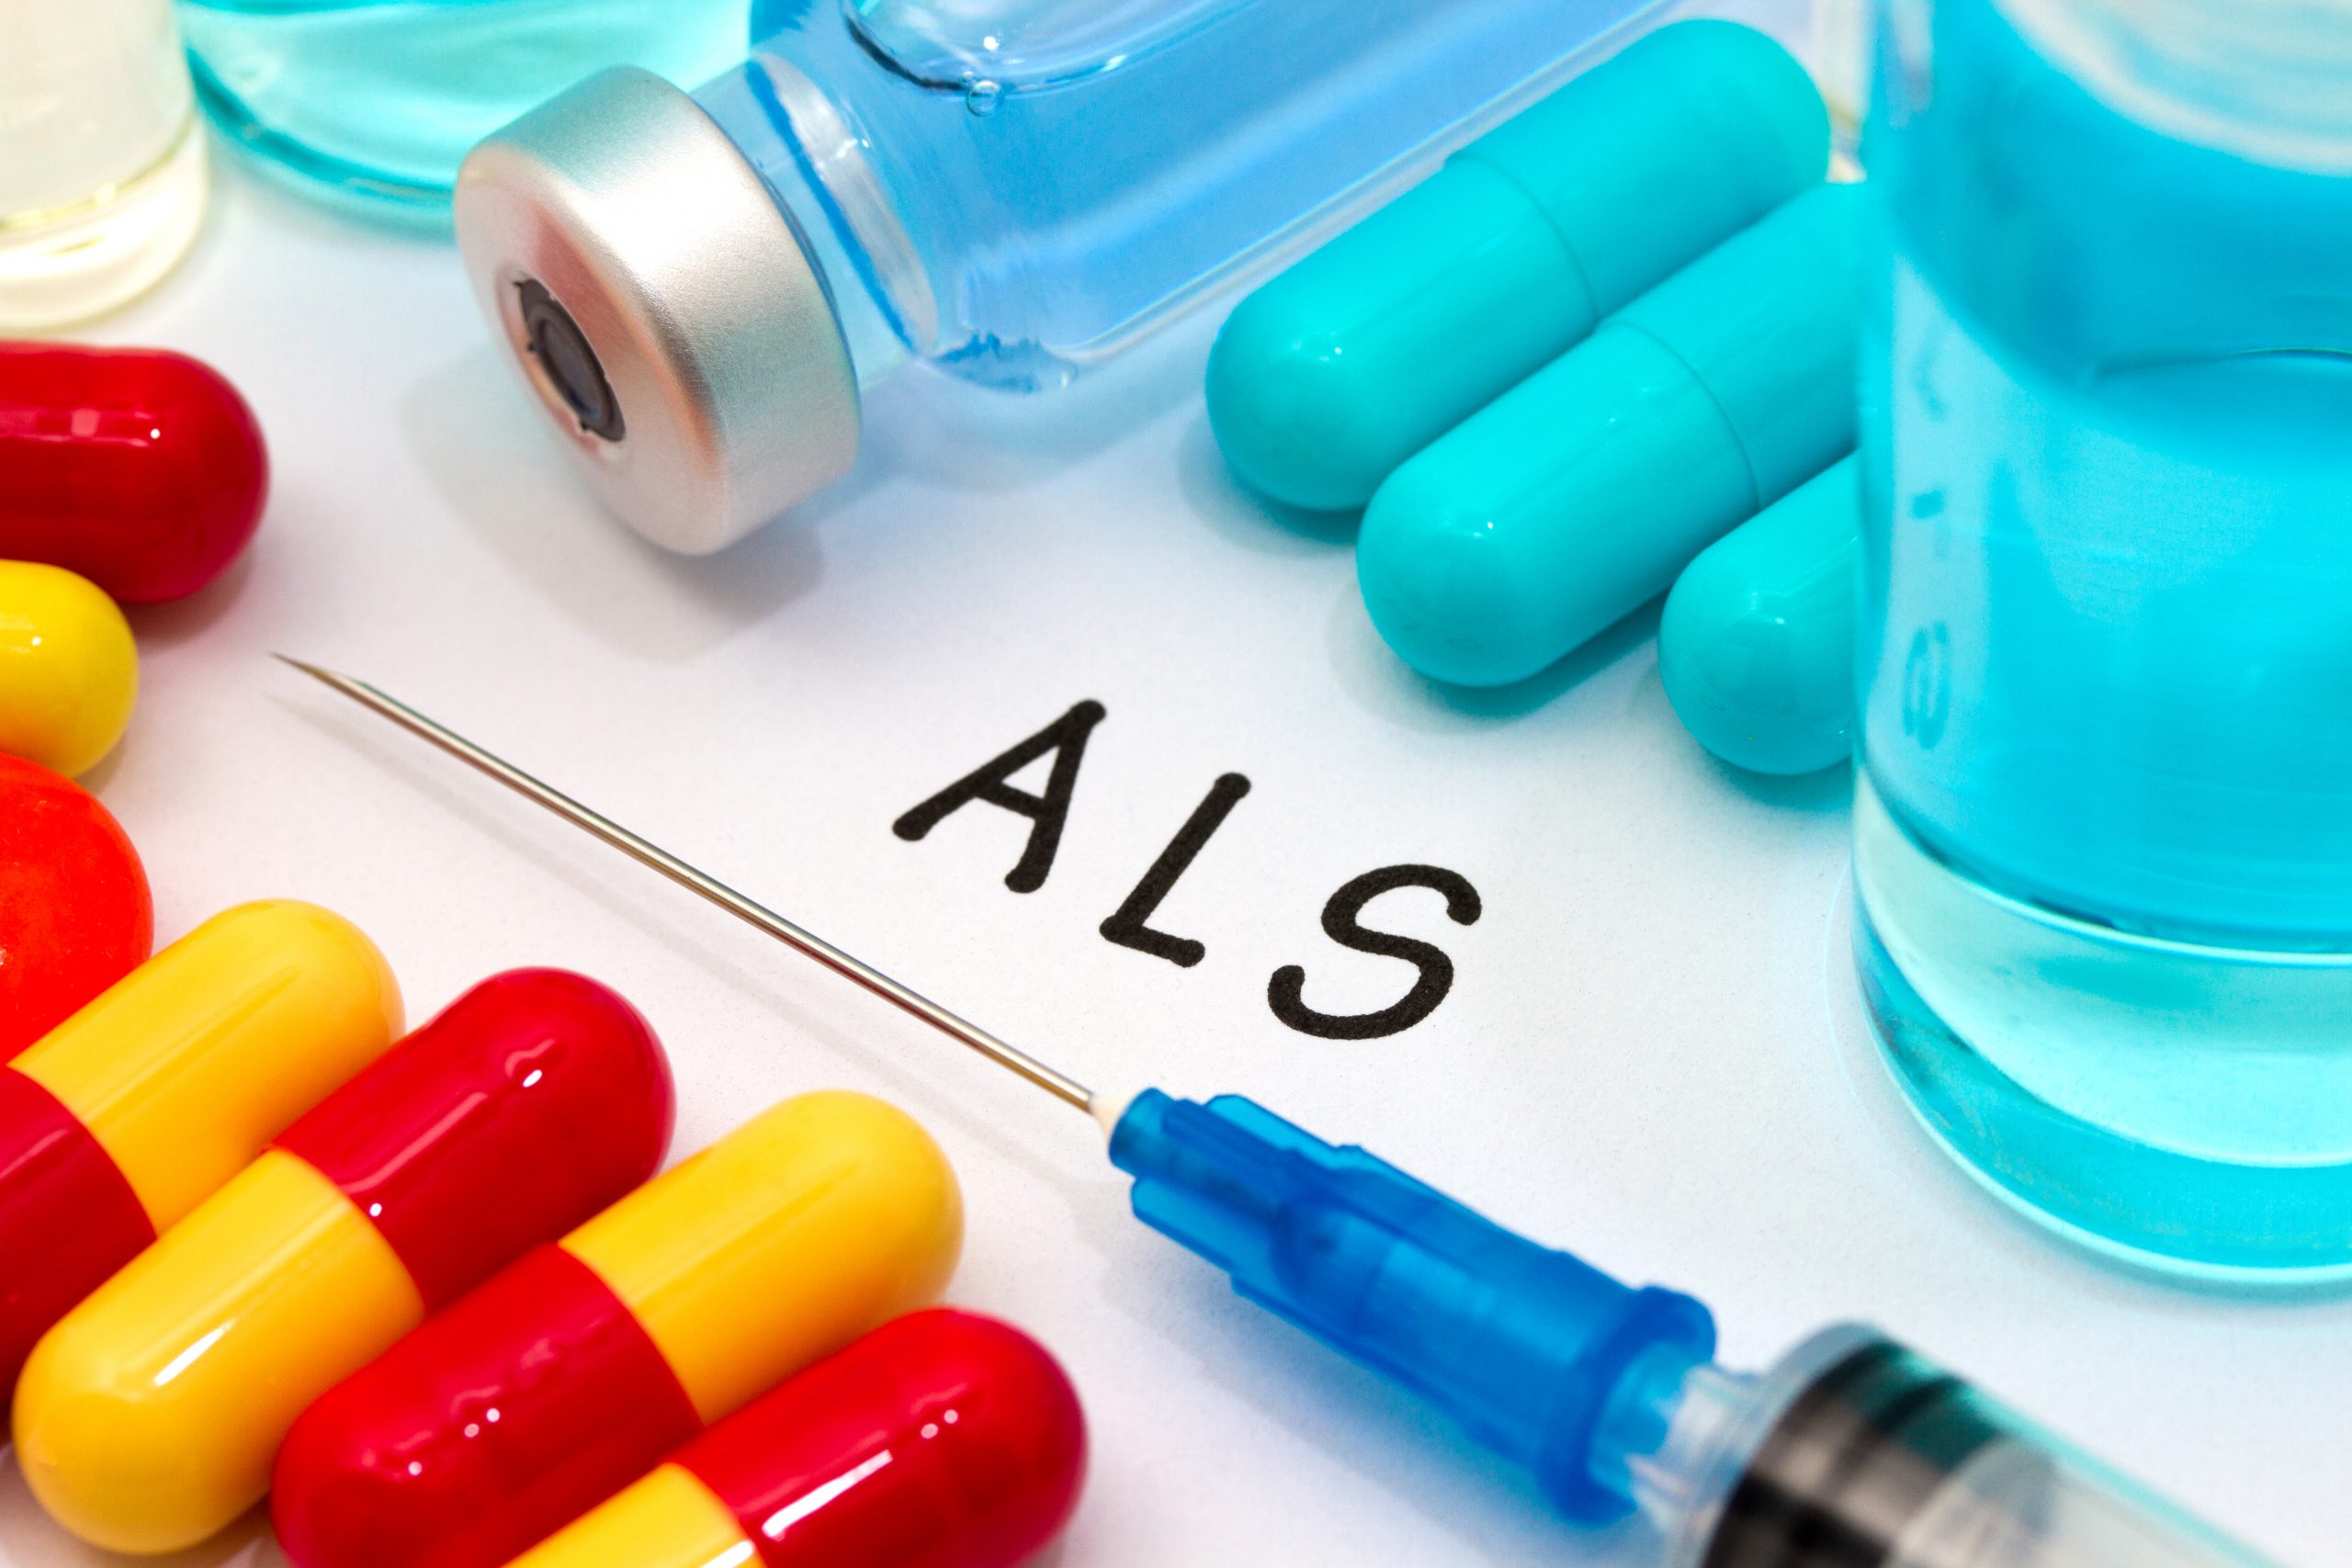 Letters 'ALS' surrounded by capsules and a syringe